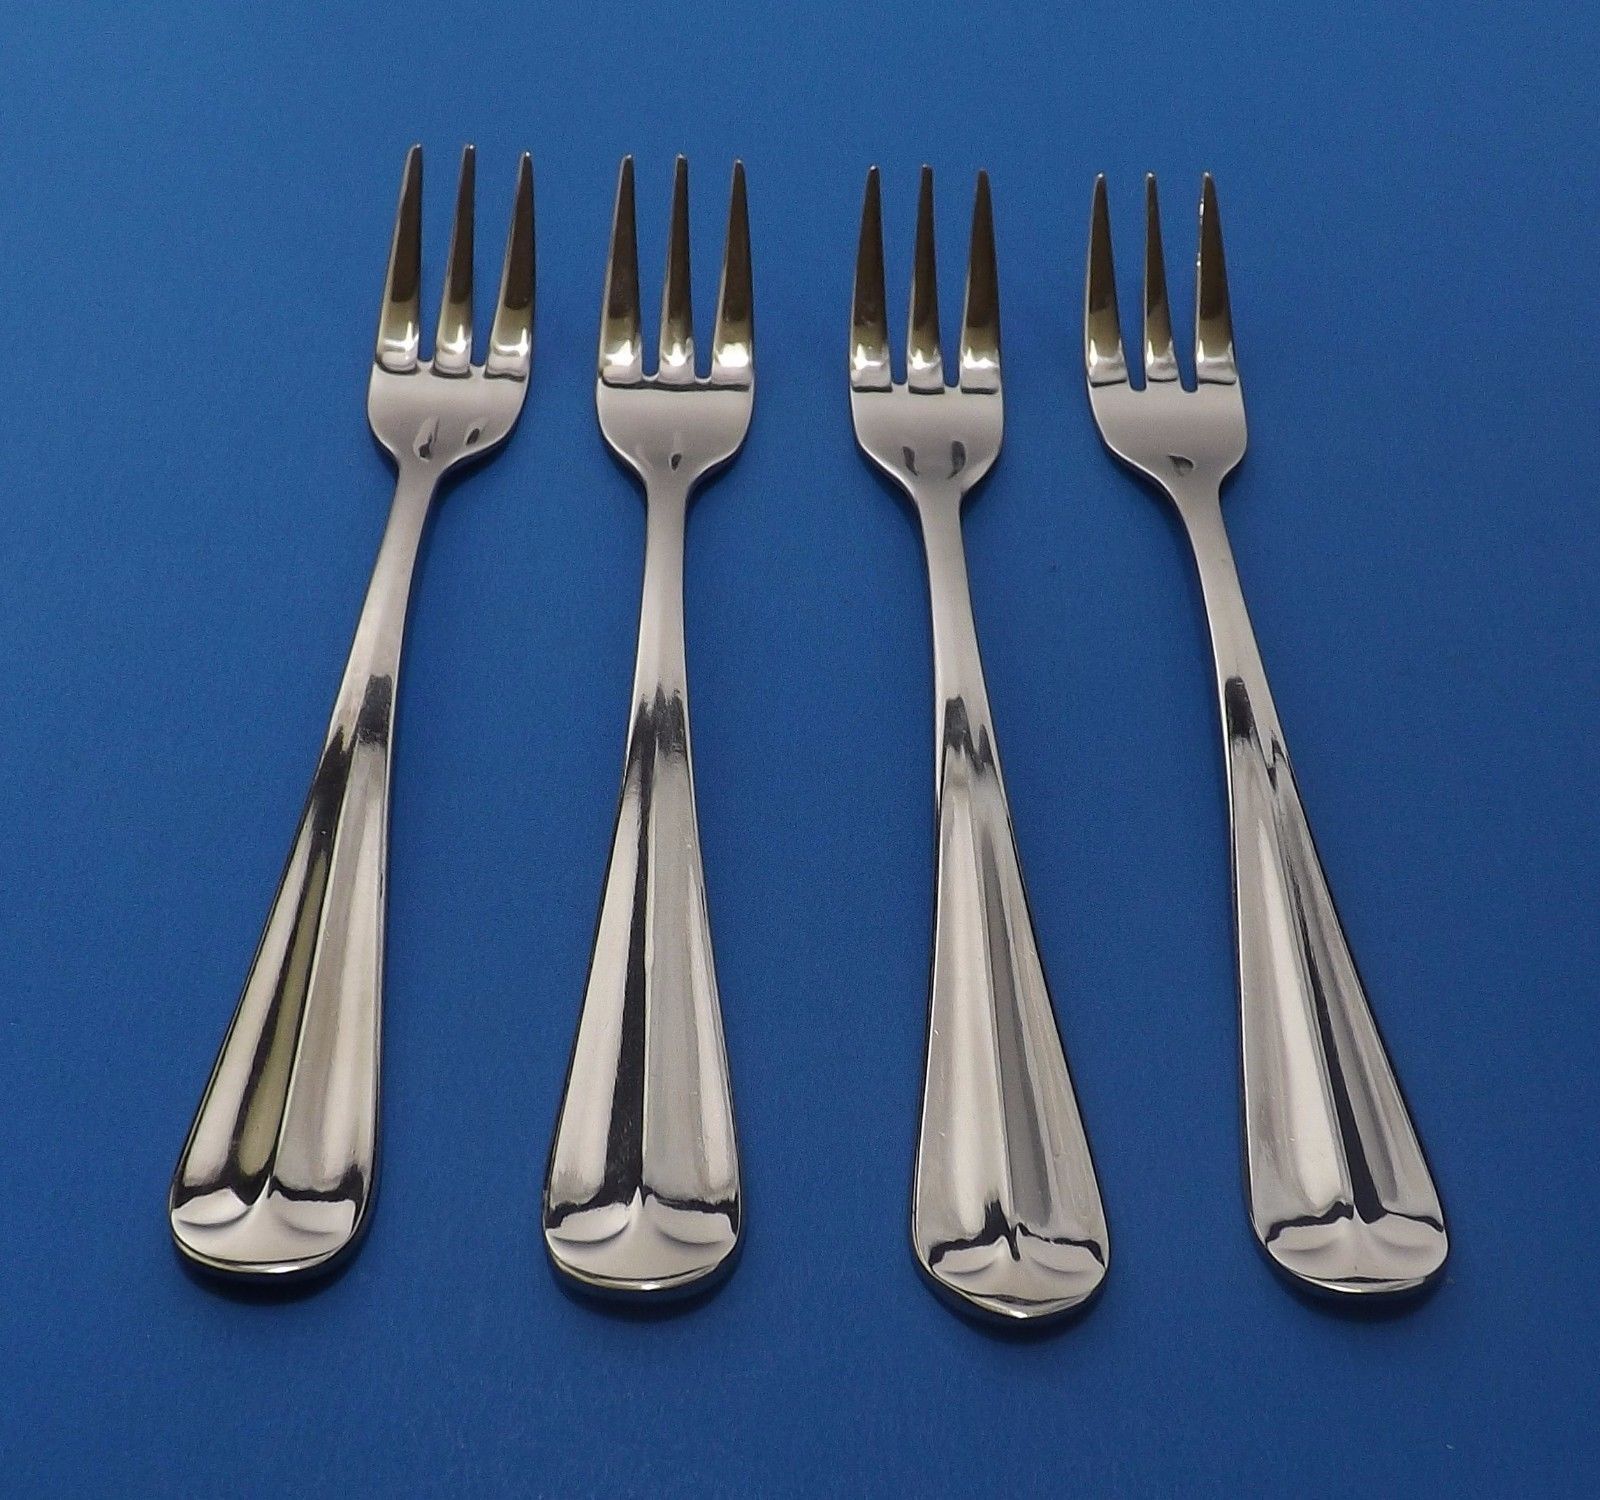 International Gran Royal Stainless 4 Cocktail/Seafood Forks  5 1/2" -2 available - $9.91